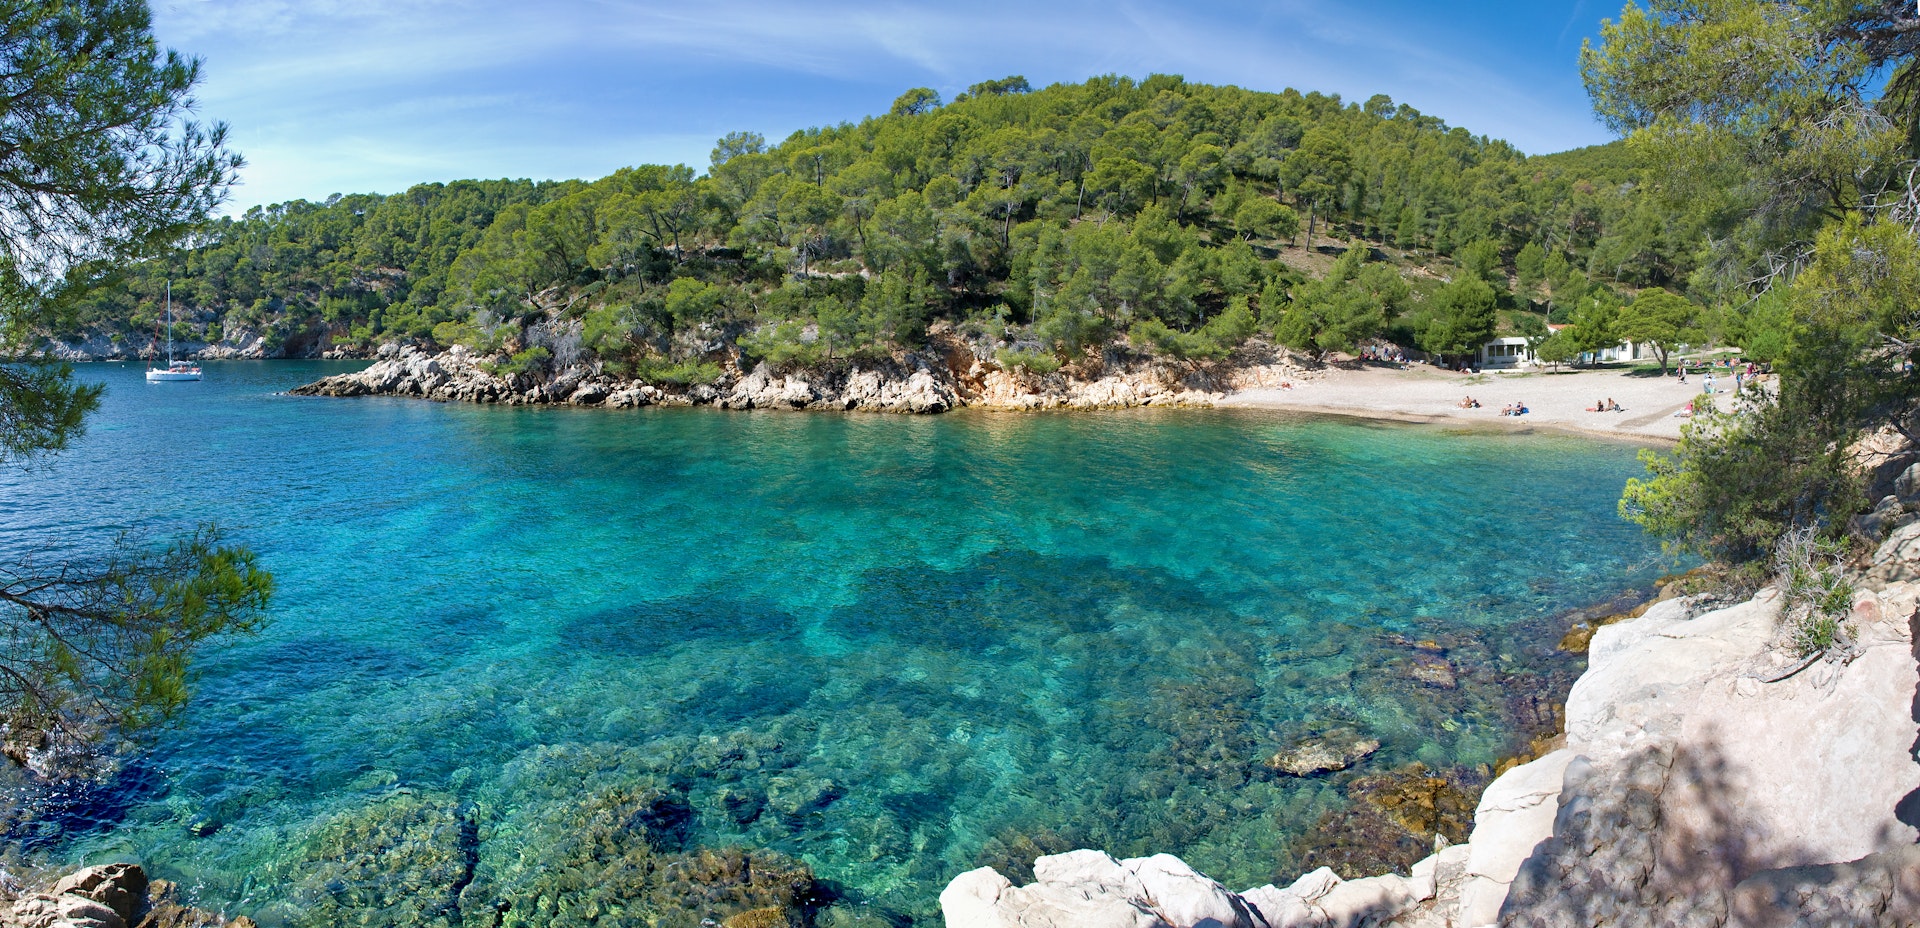 Calanque De Port D'Alon, bay with clear water near Cassis and Bandol in France